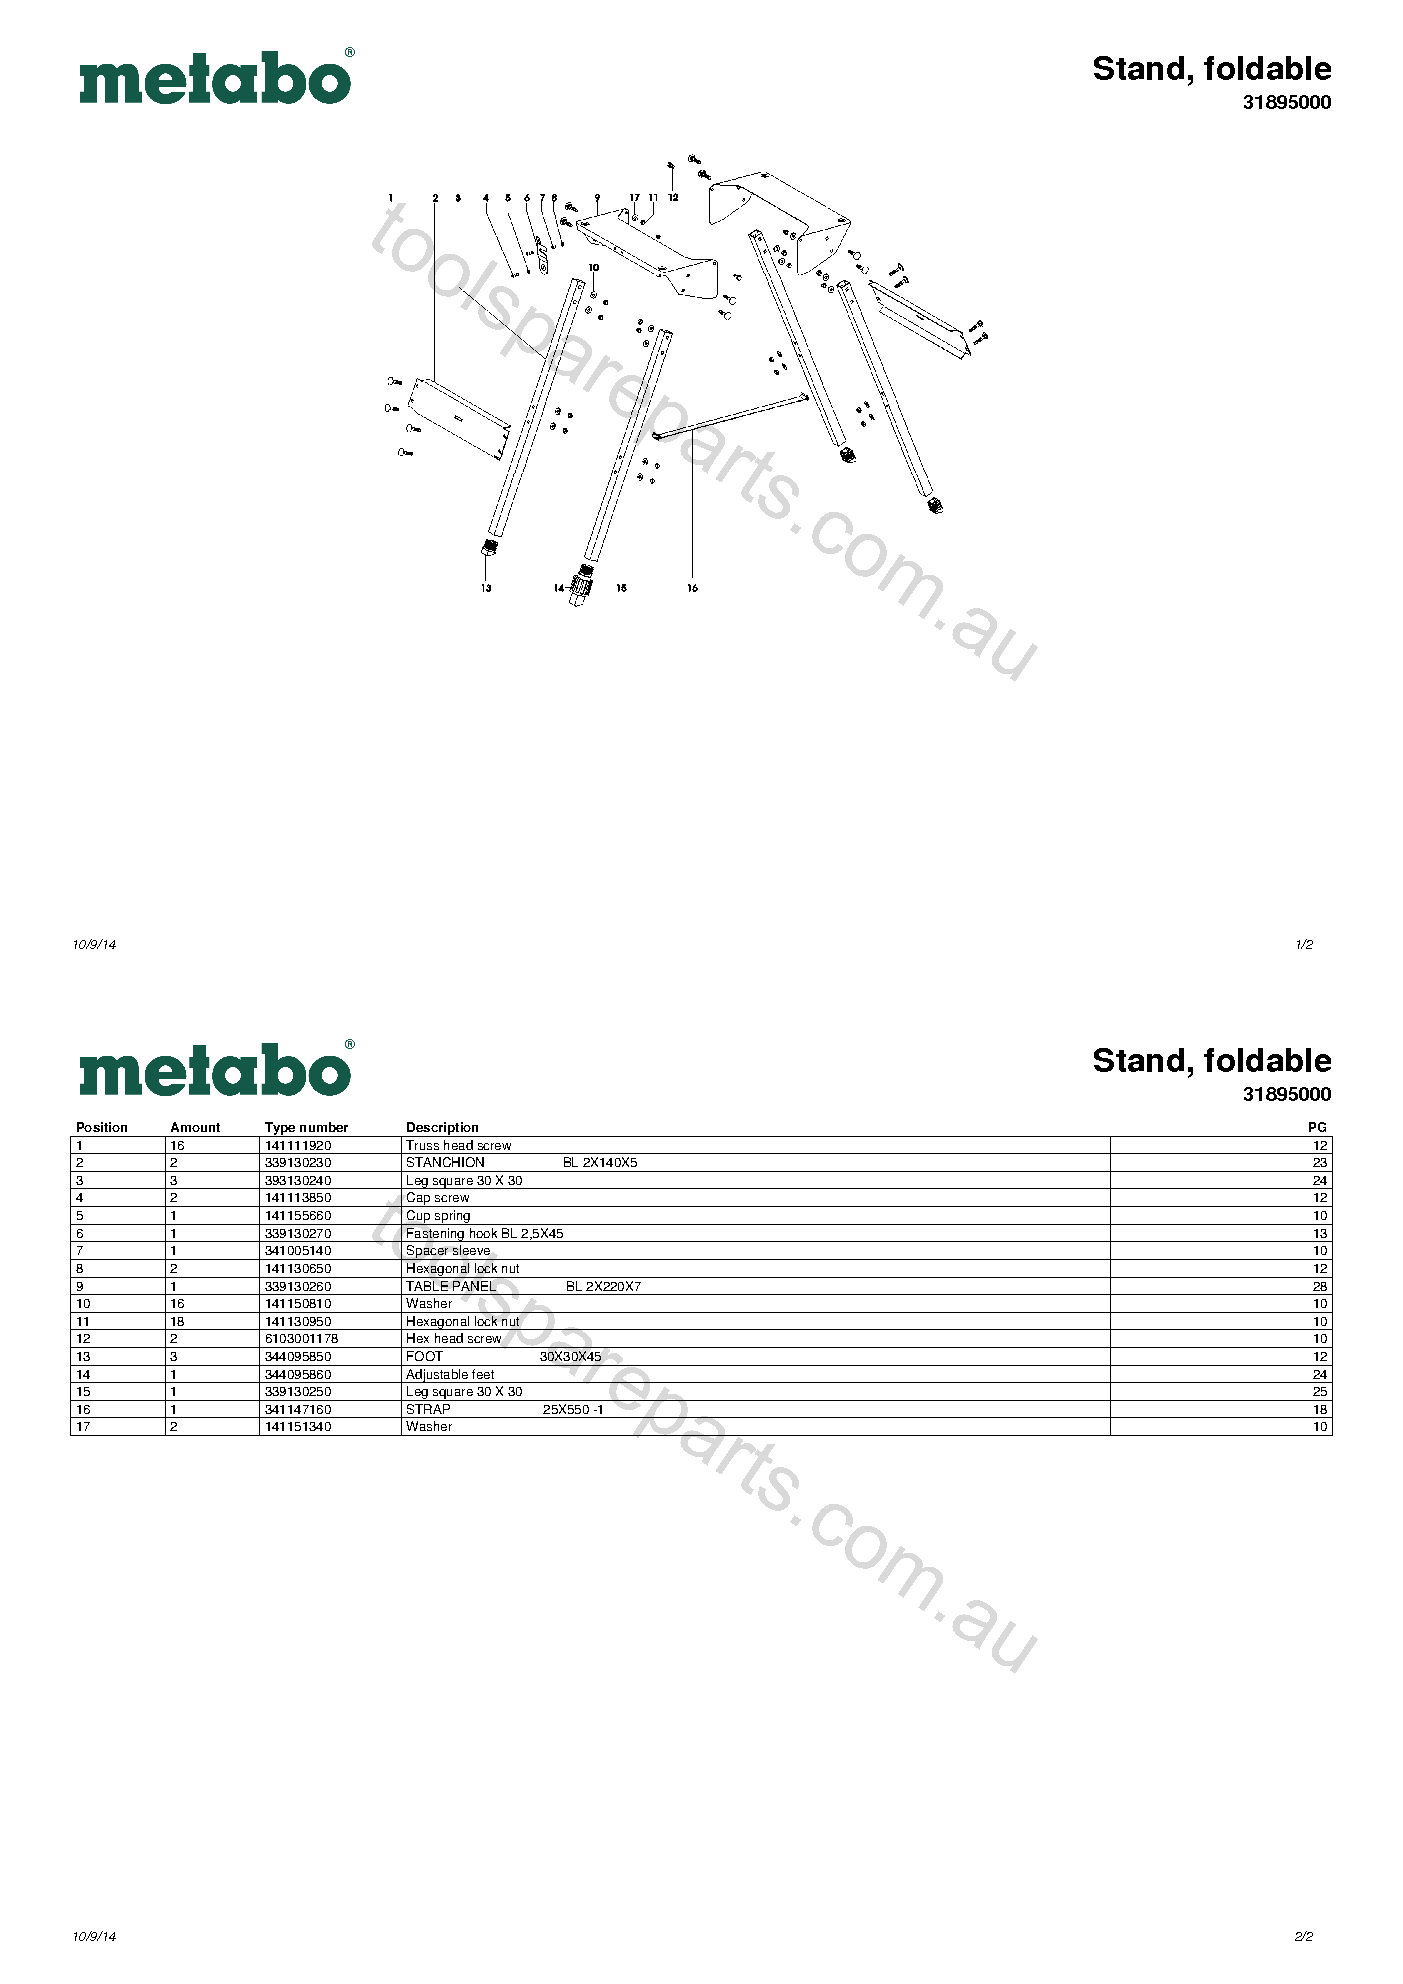 Metabo Stand, foldable 31895000  Diagram 1